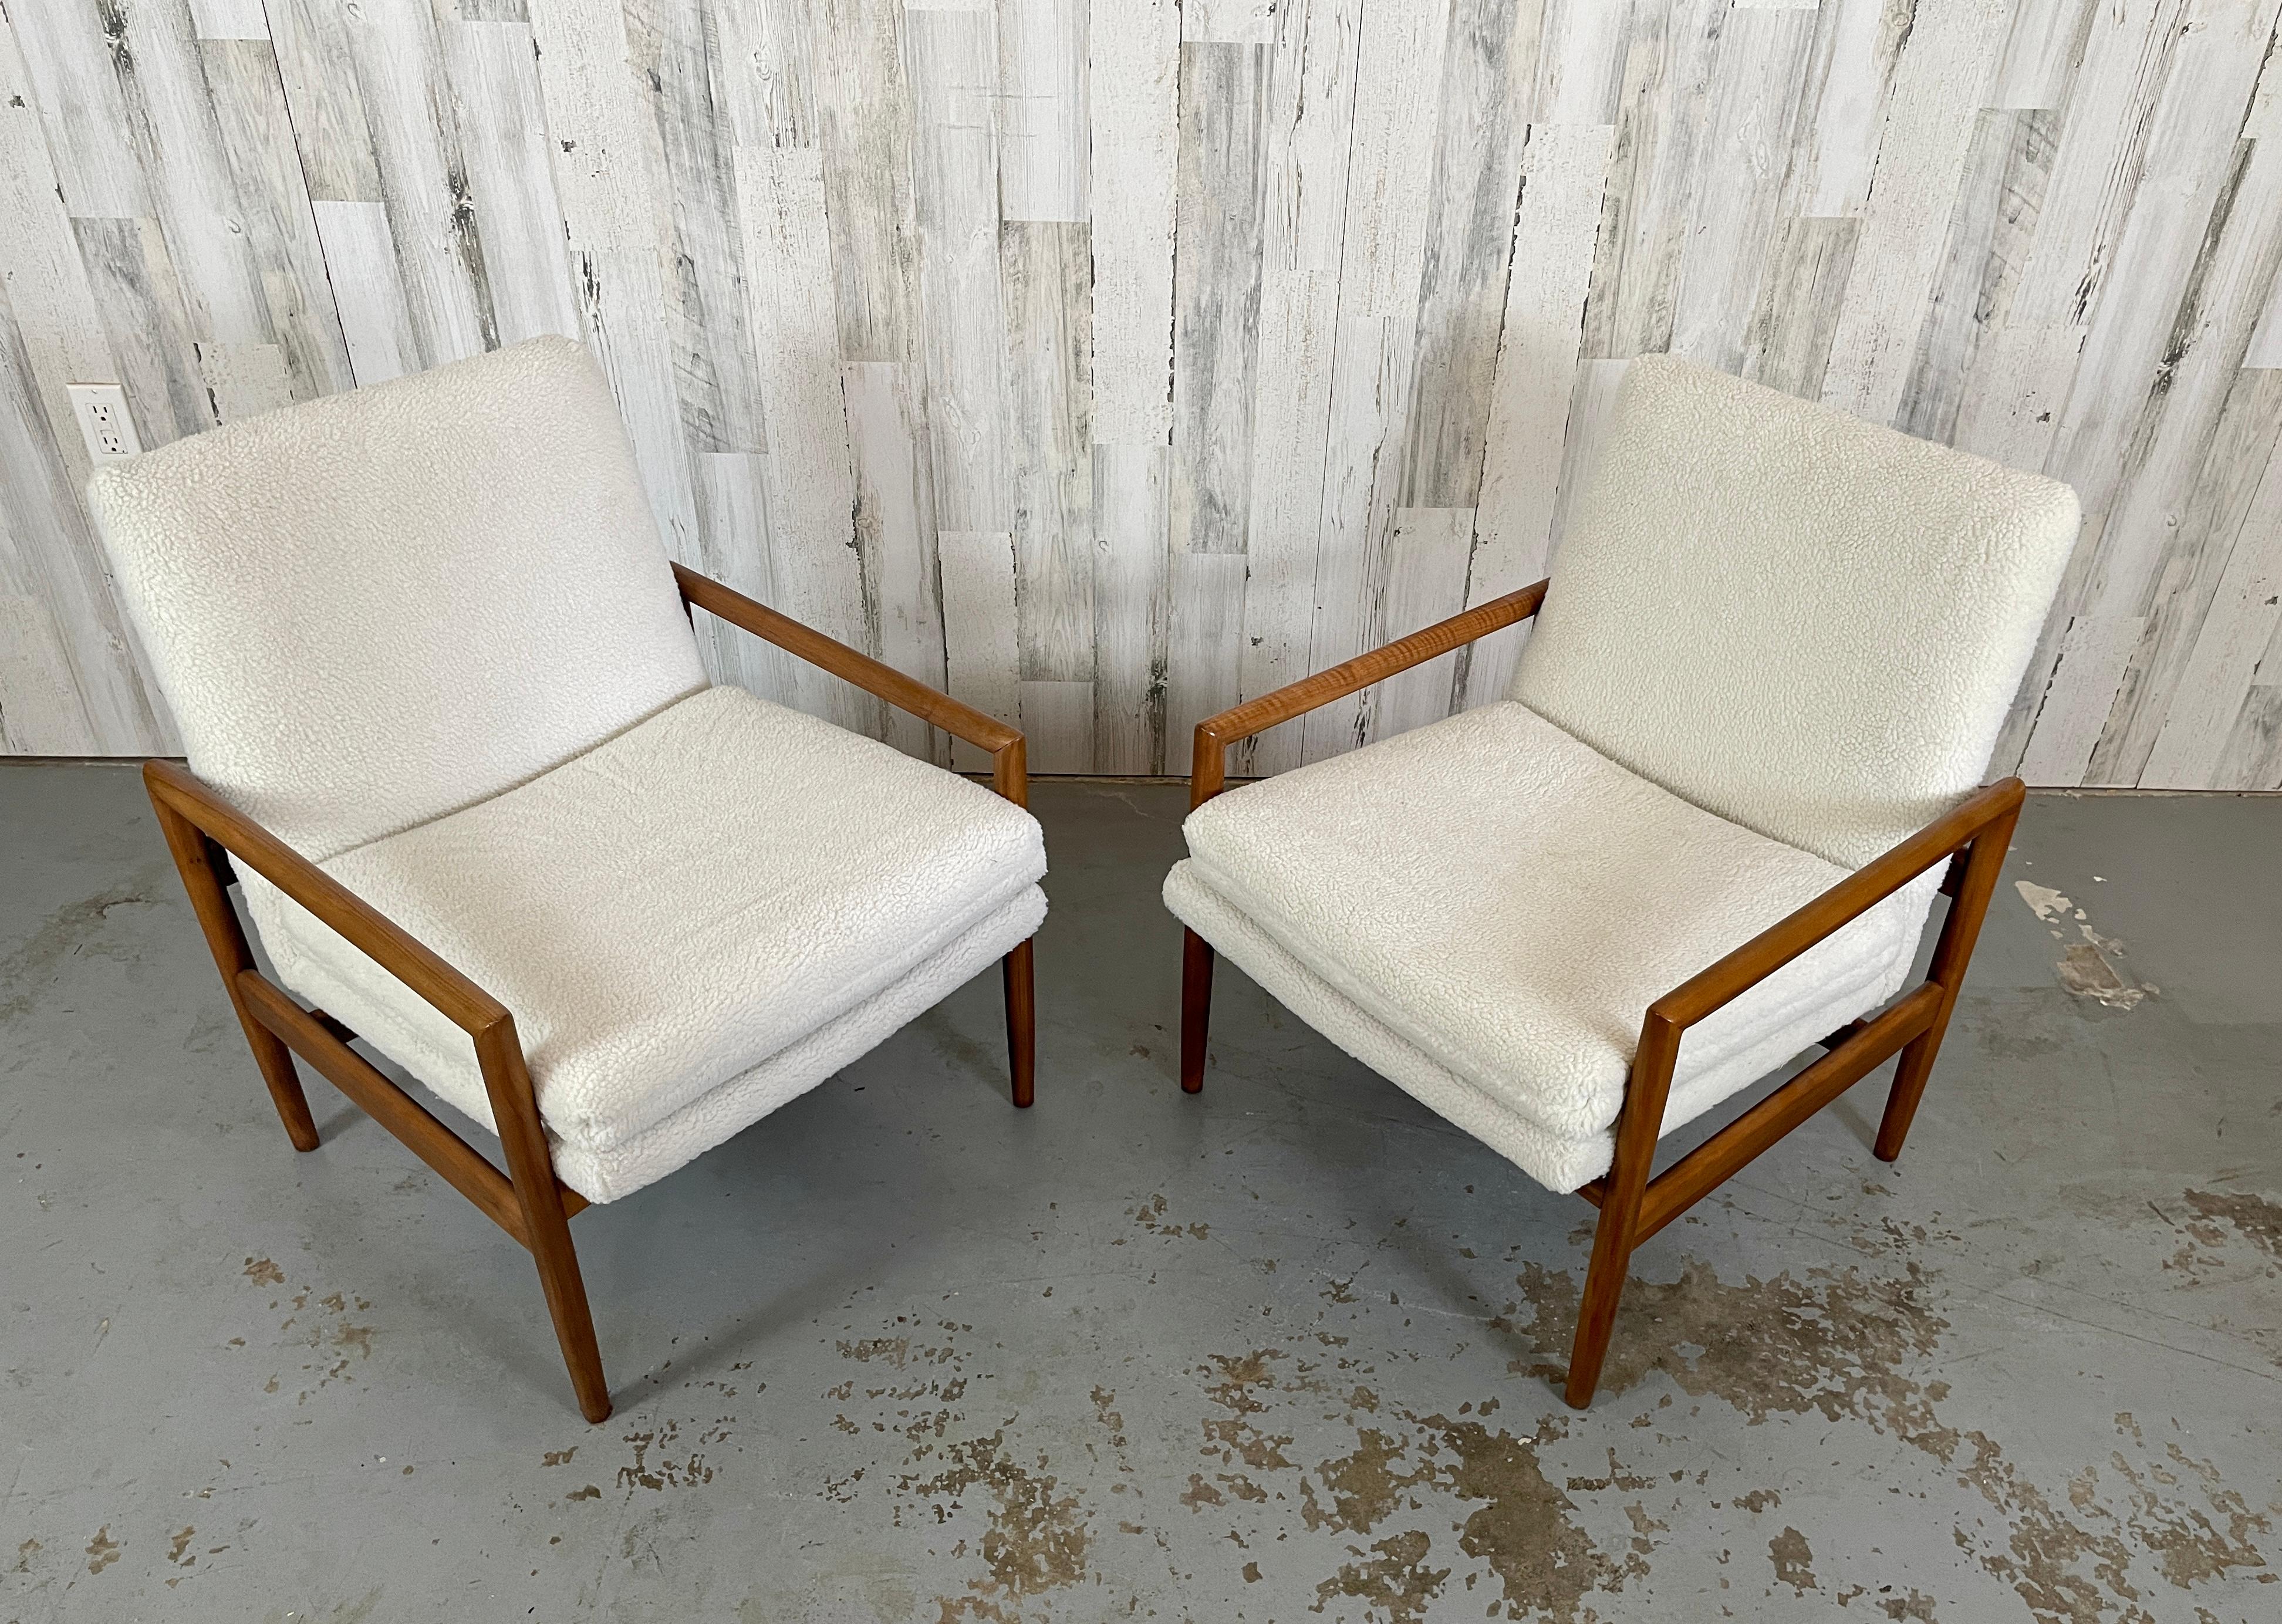 A very rare pair of Milo Baughman for Thayer Coggin lounge chairs. These are an earlier model that include the original labels. These chairs have been restored in a faux teddy bear ivory Sherpa fabric. Very modern and trendy. These are a true